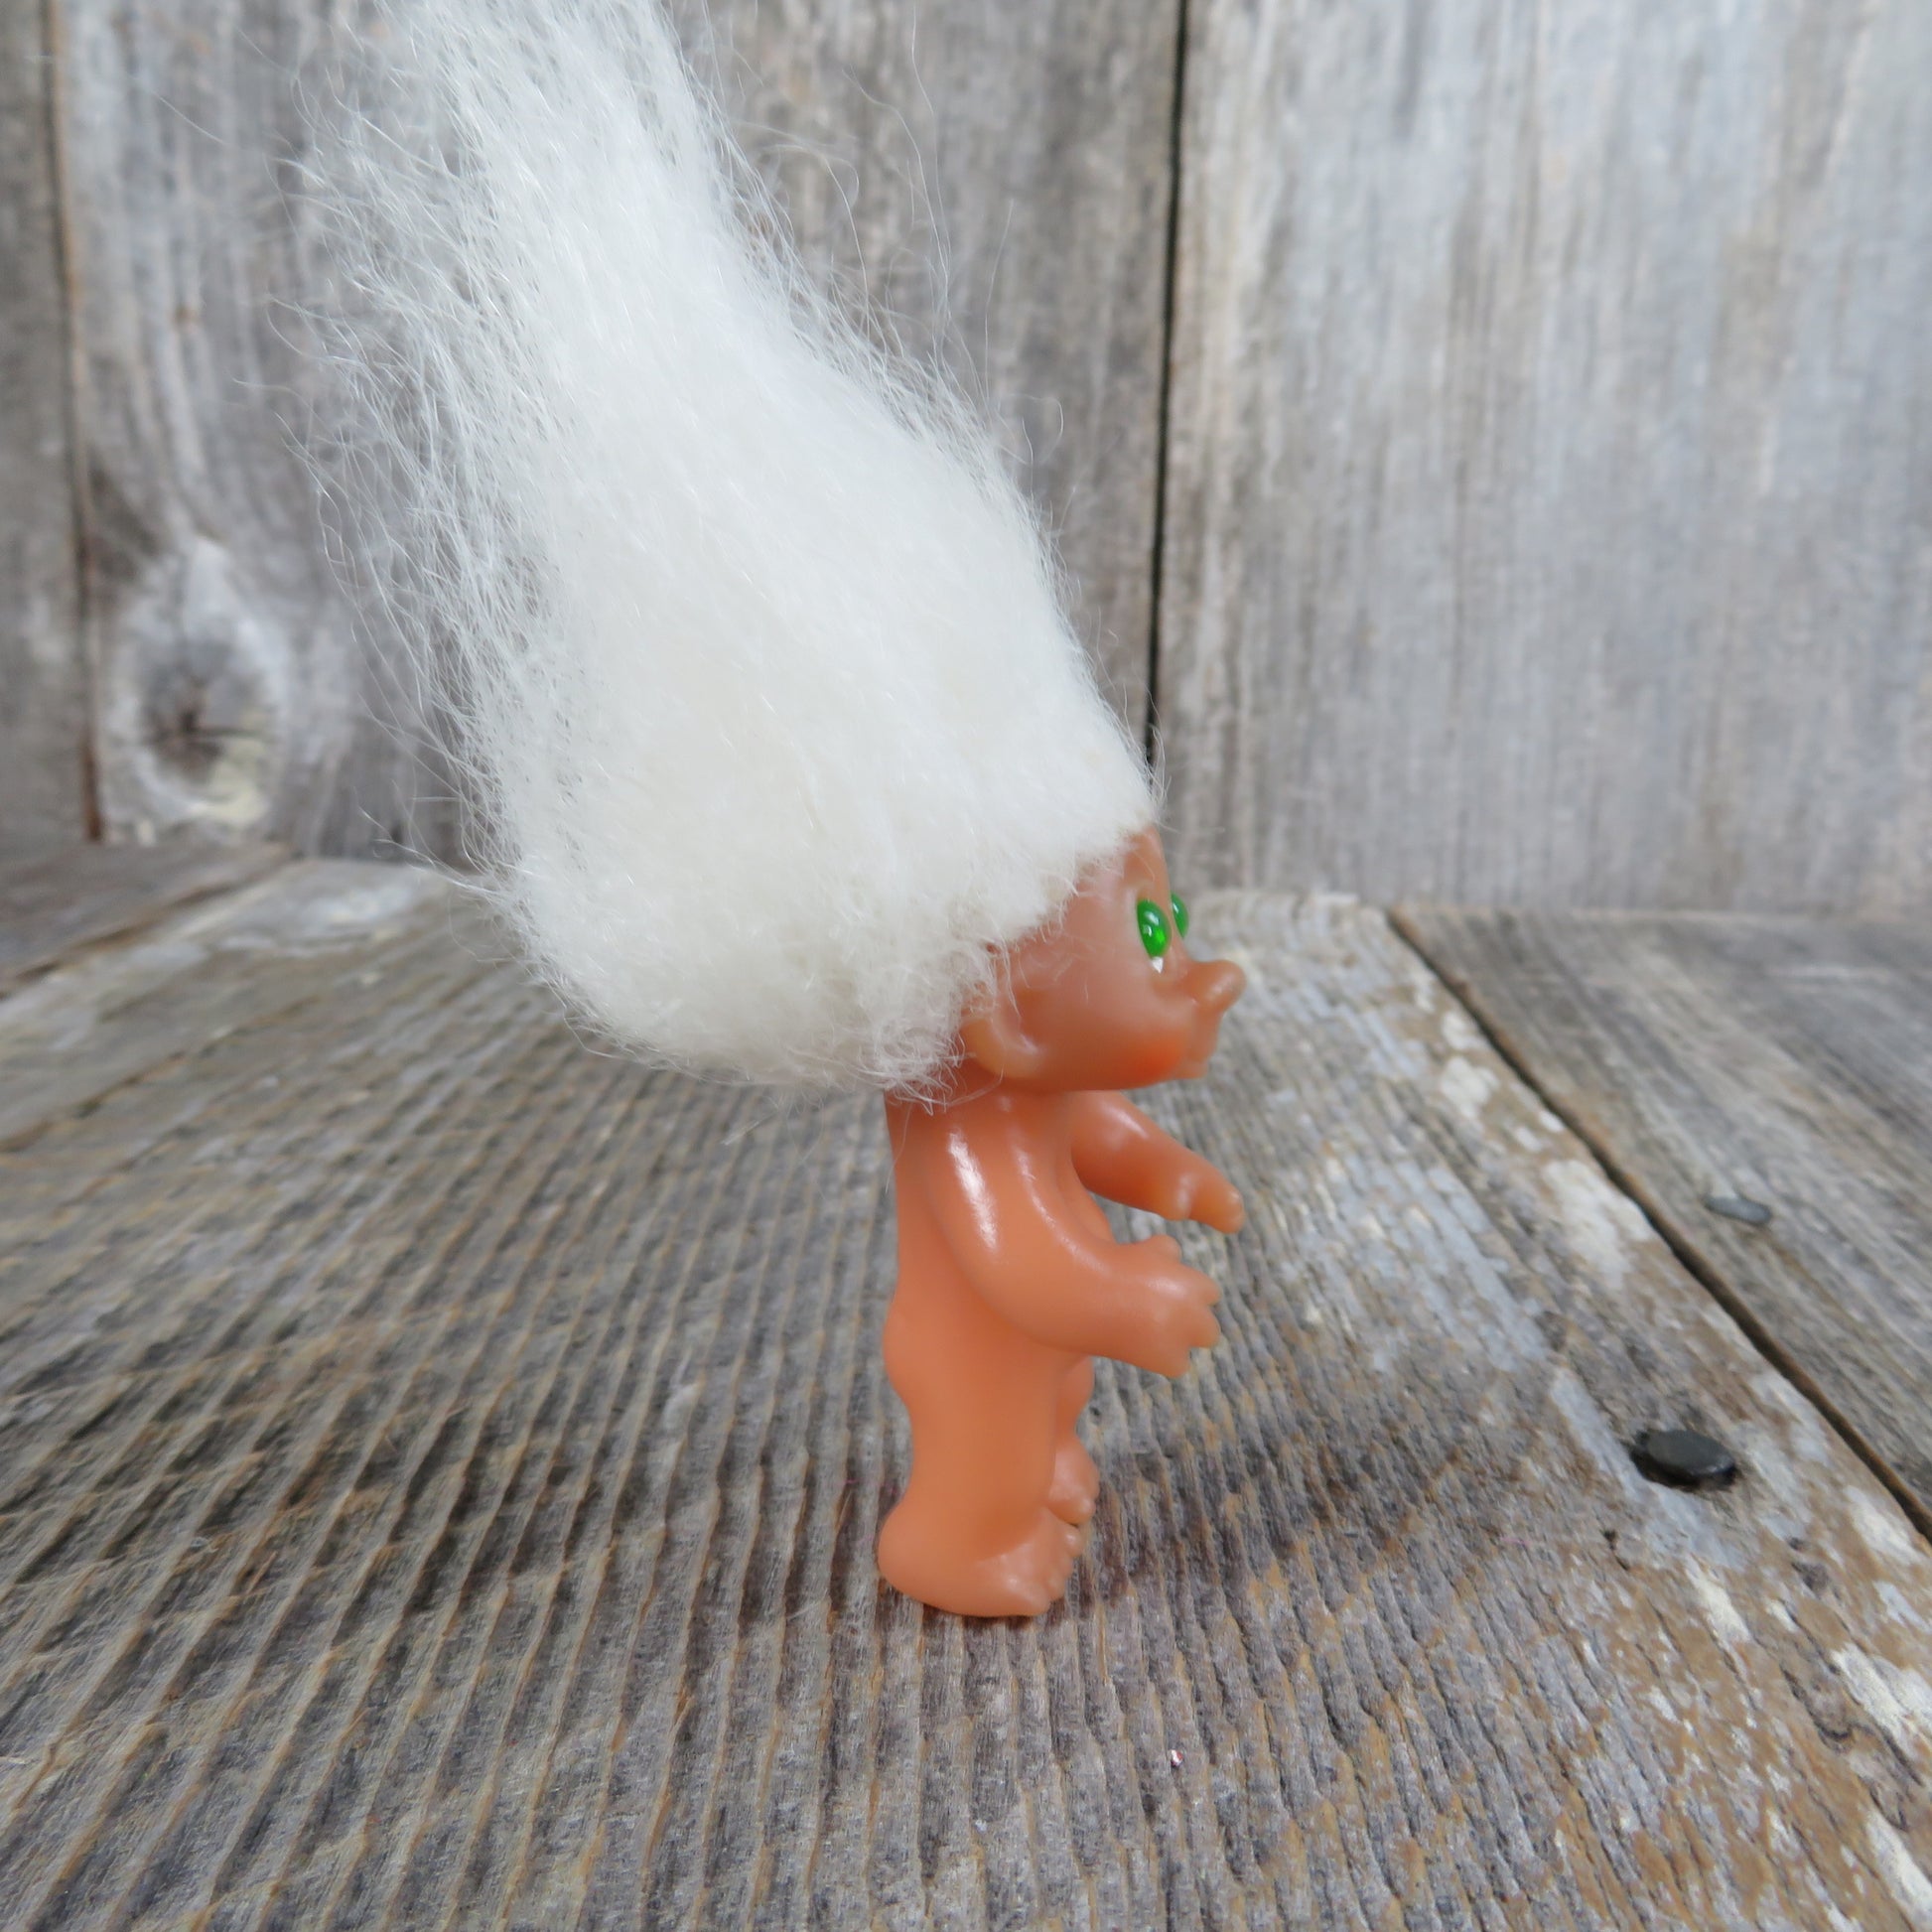 Vintage Baby Troll Doll White Hair Toddler Green Eyes Dam Norfin Naked 2.5 inches 1983 - At Grandma's Table